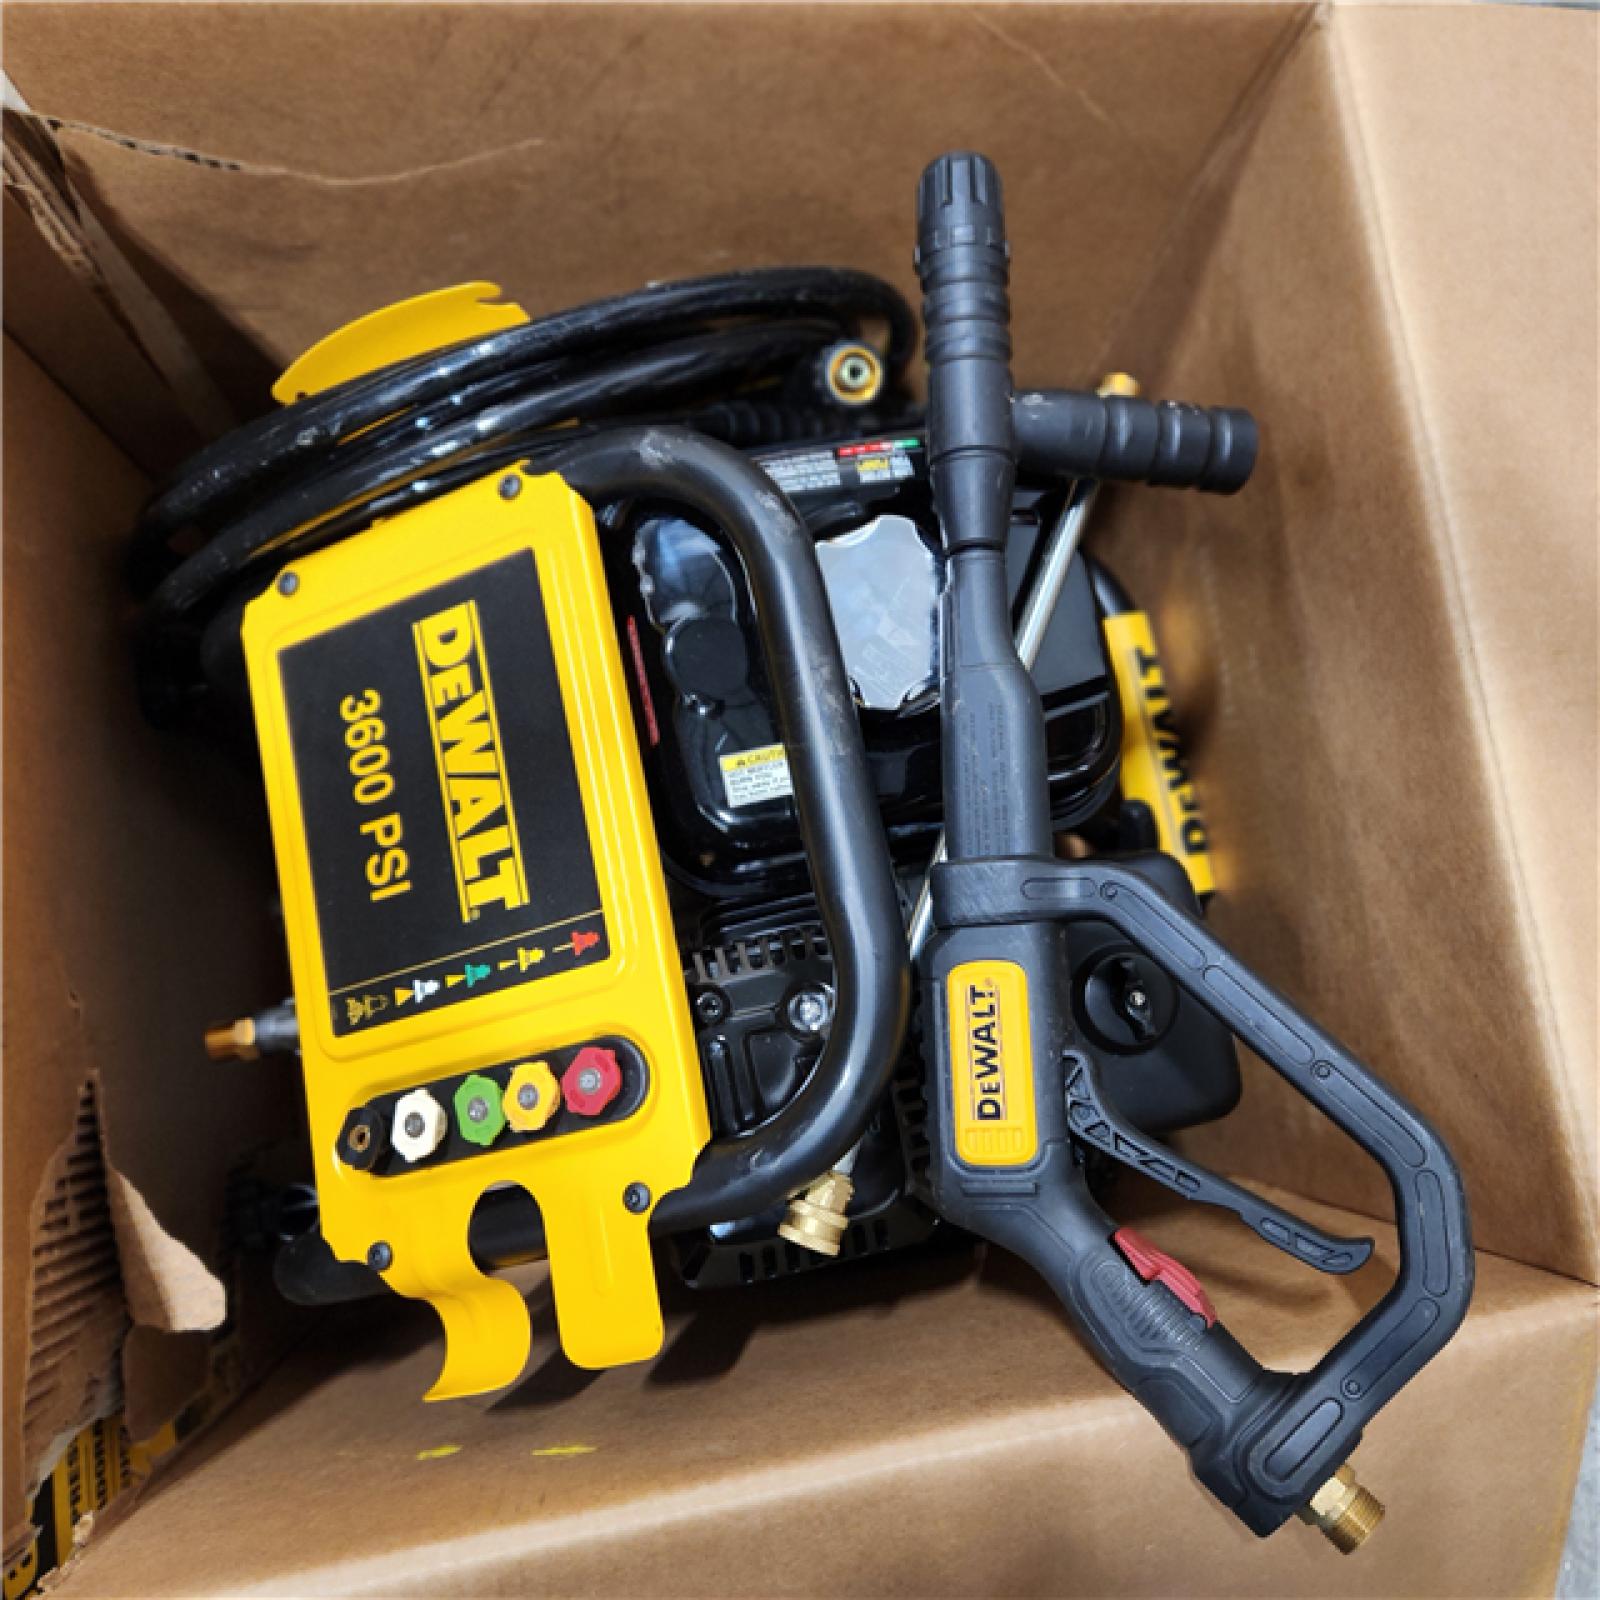 Dallas Location - As-Is DEWALT 3600 PSI 2.5 GPM Gas Pressure Washer-Appears Good Condition